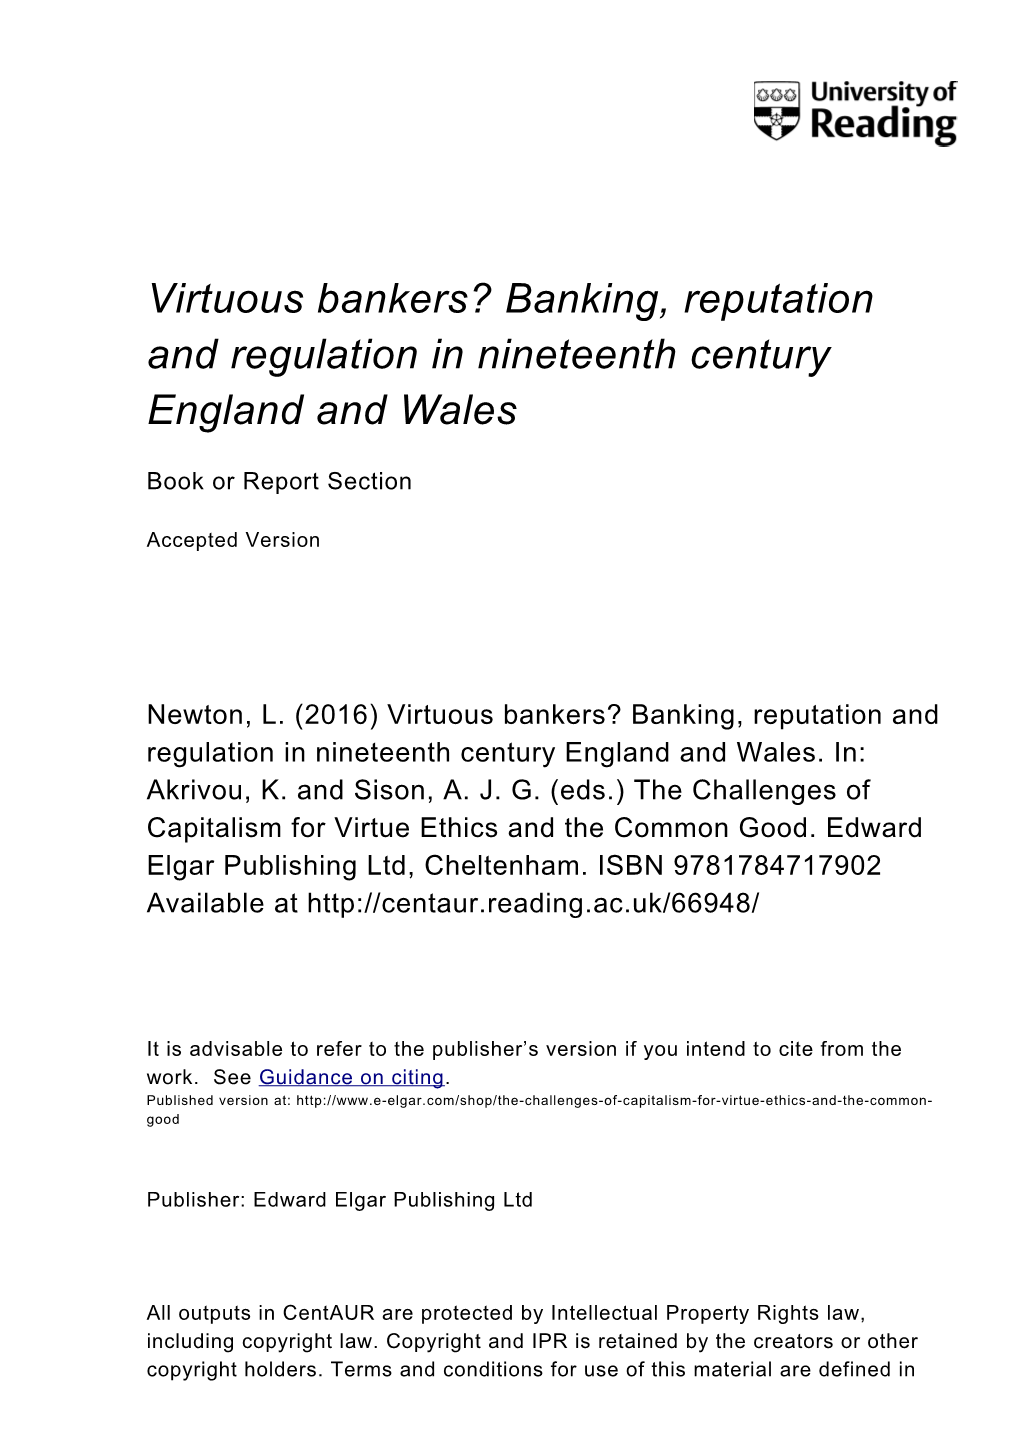 Virtuous Bankers? Banking, Reputation and Regulation in Nineteenth Century England and Wales